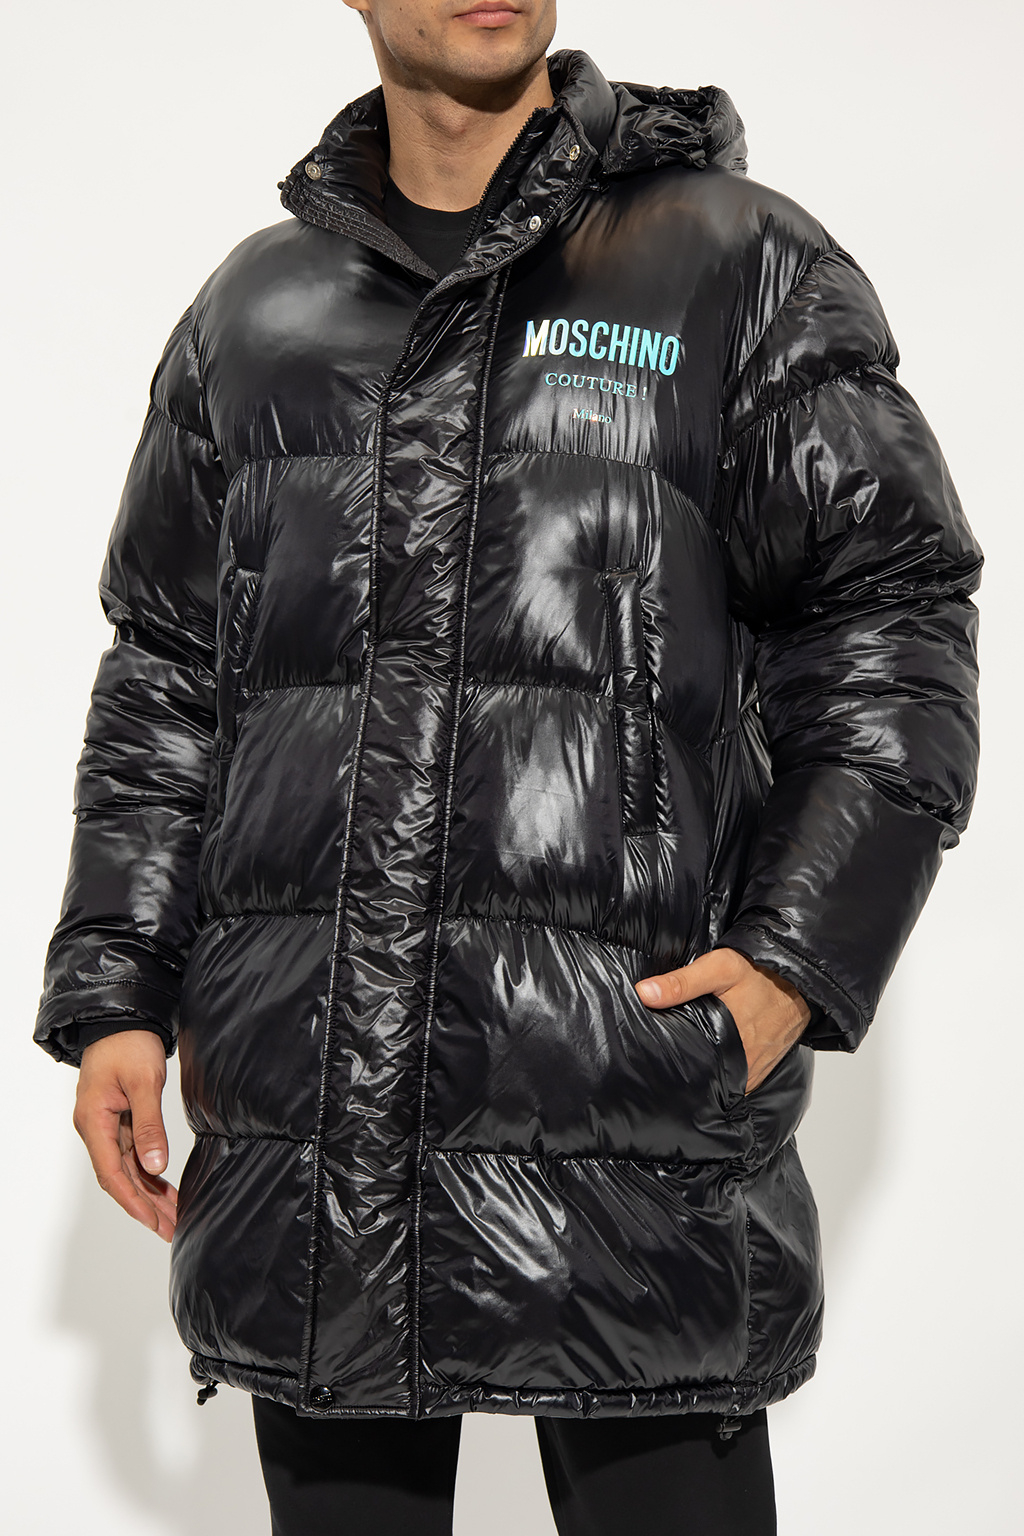 Moschino jacket but with logo